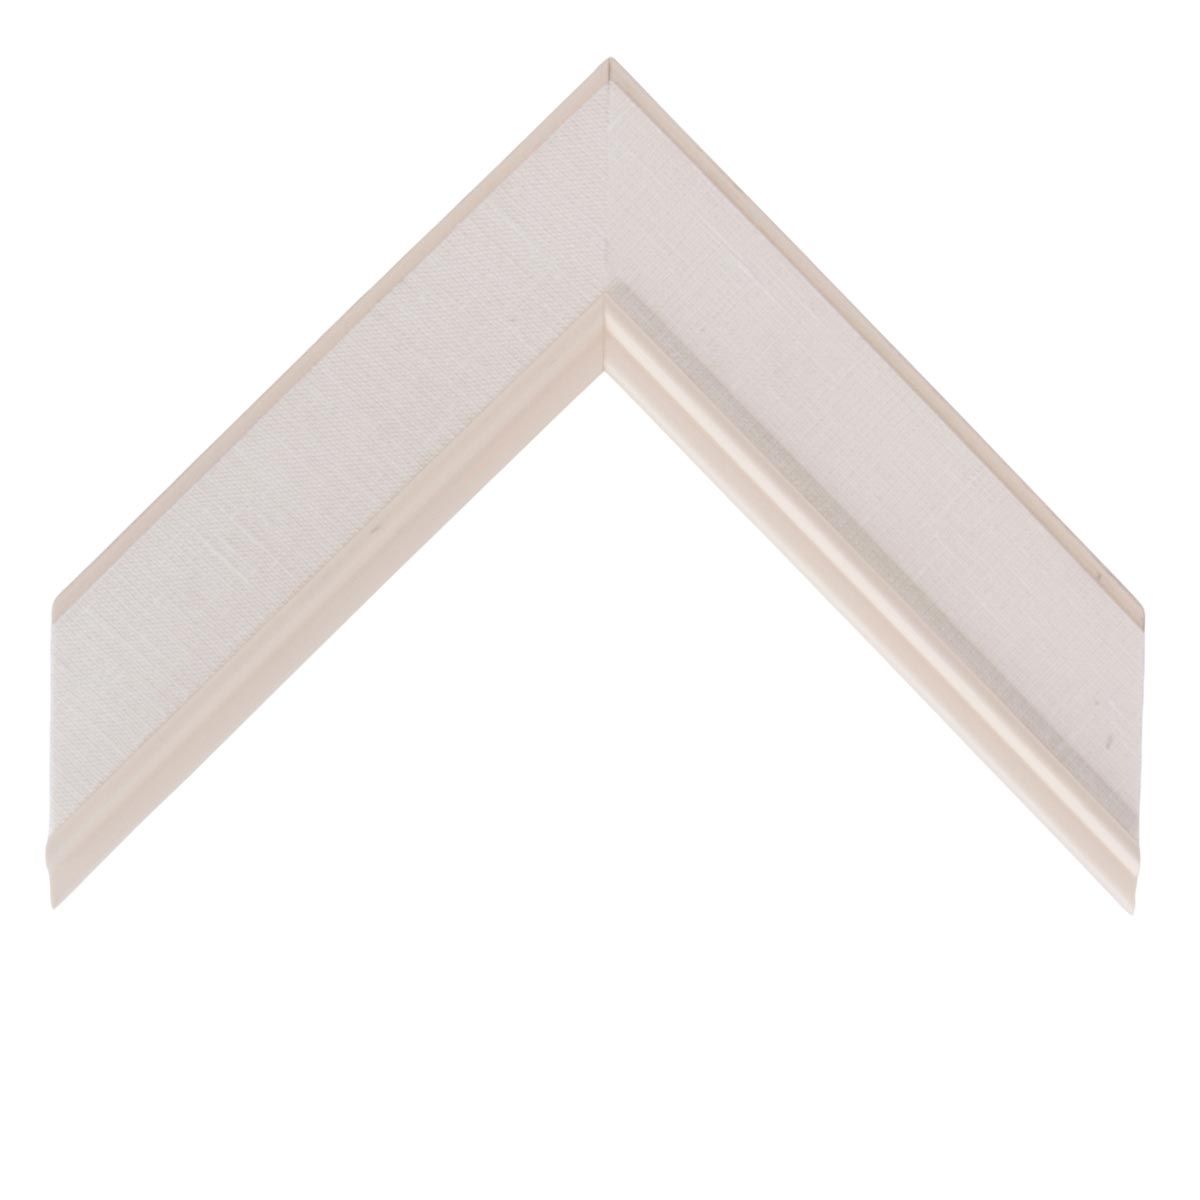 Linen Liner Moulding - Natural, White Bead ML120-1 ¾, 14 x 18 inches